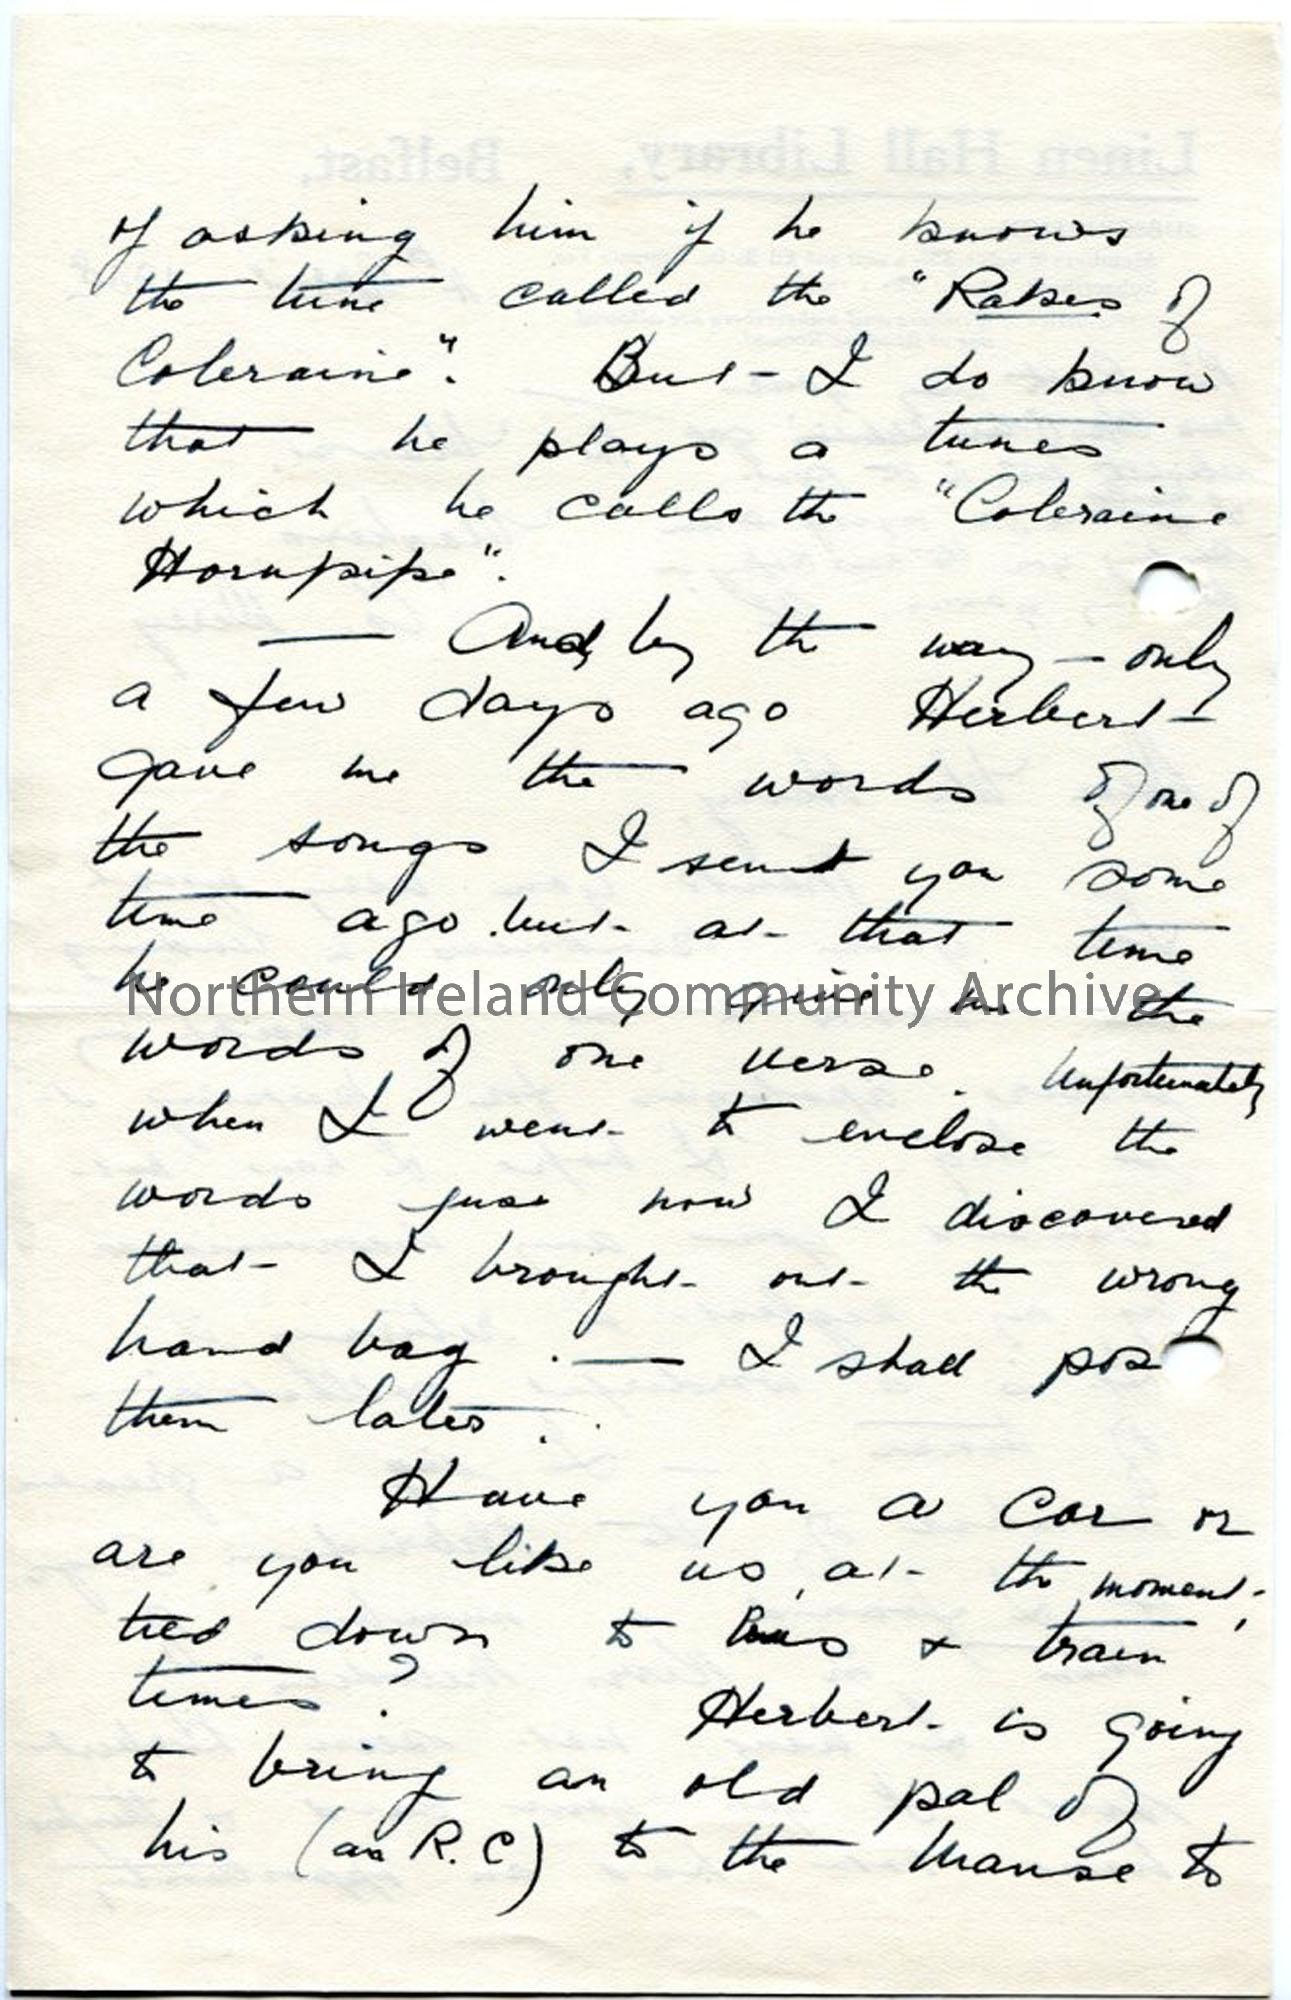 Page two: Letter from Anneen Esler, 4.4.1938